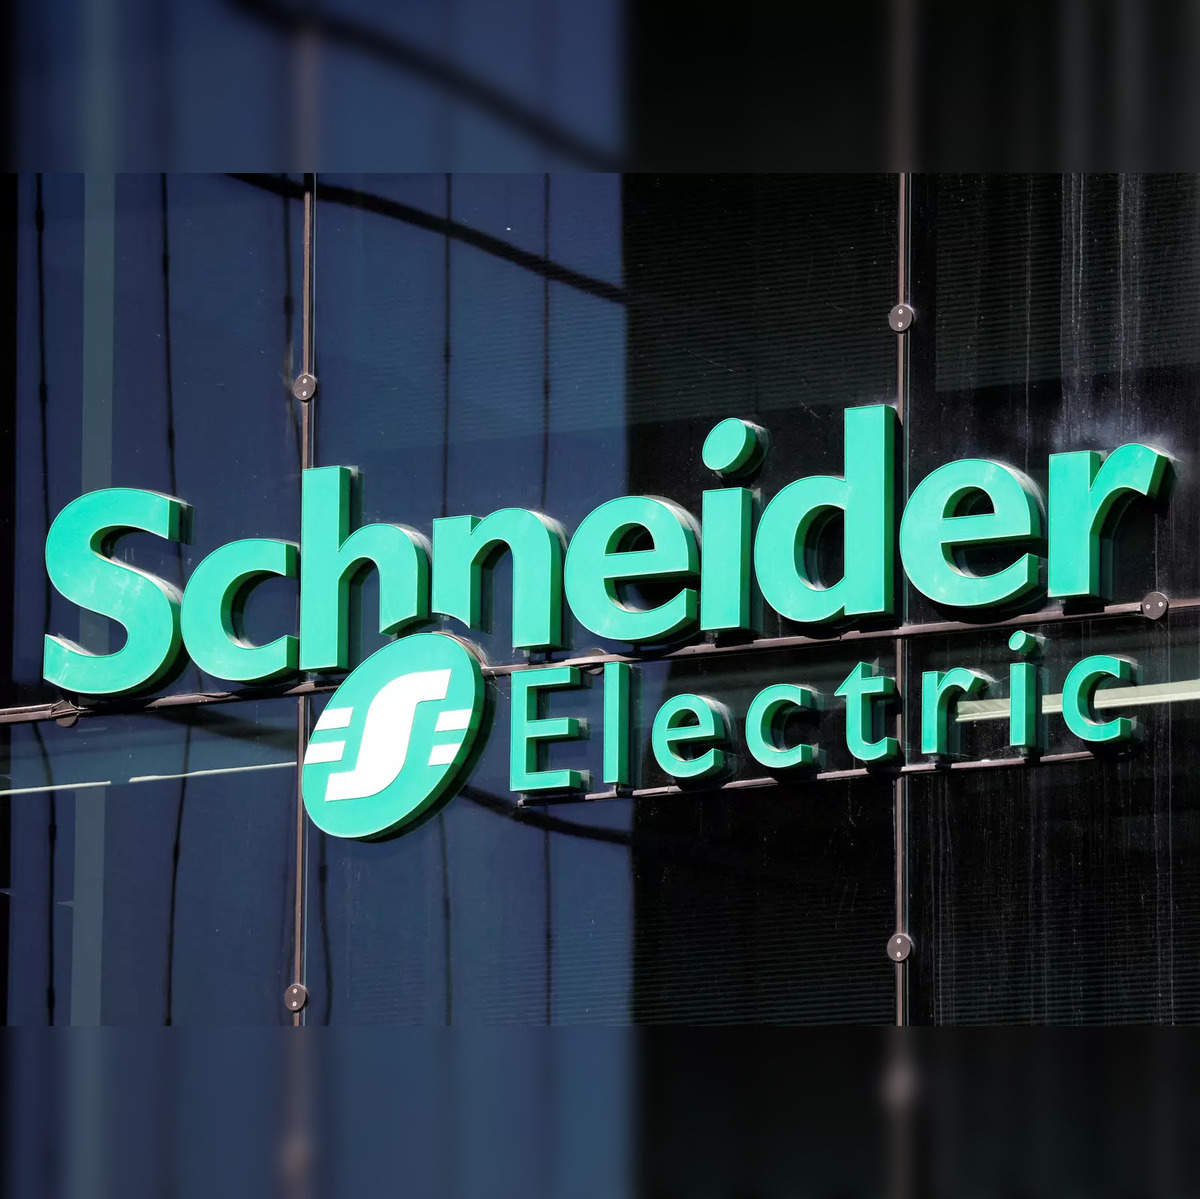 Schneider Electric to increase green content to 50% in 3 years - The Hindu